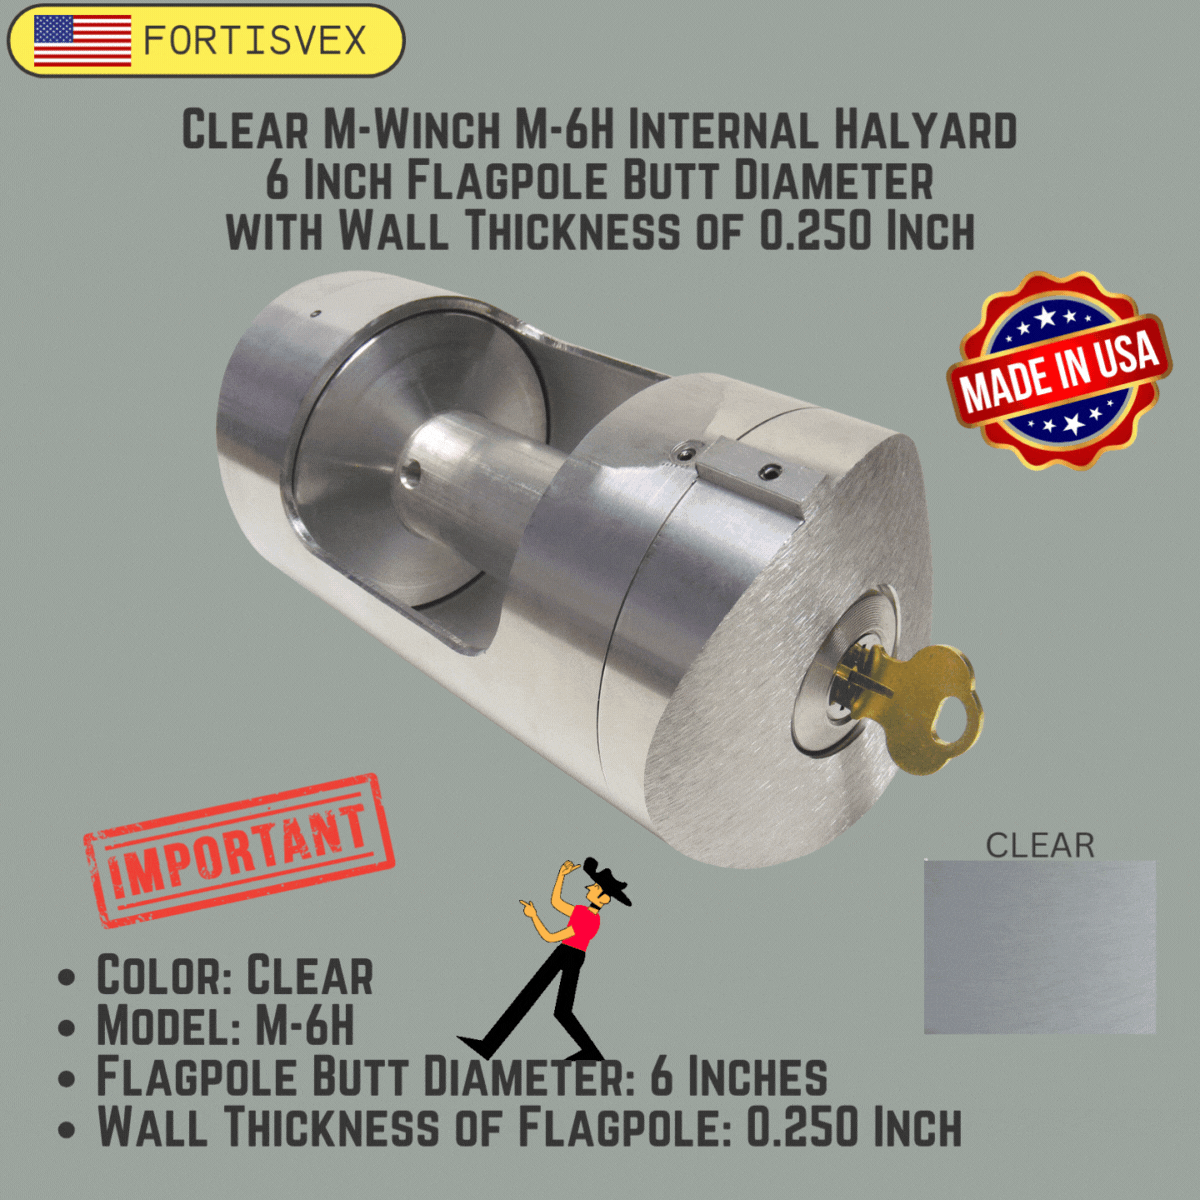 Clear M-Winch M-6H Internal Halyard 6 Inch Flagpole Butt Diameter with Wall Thickness of 0.250 Inch 360502